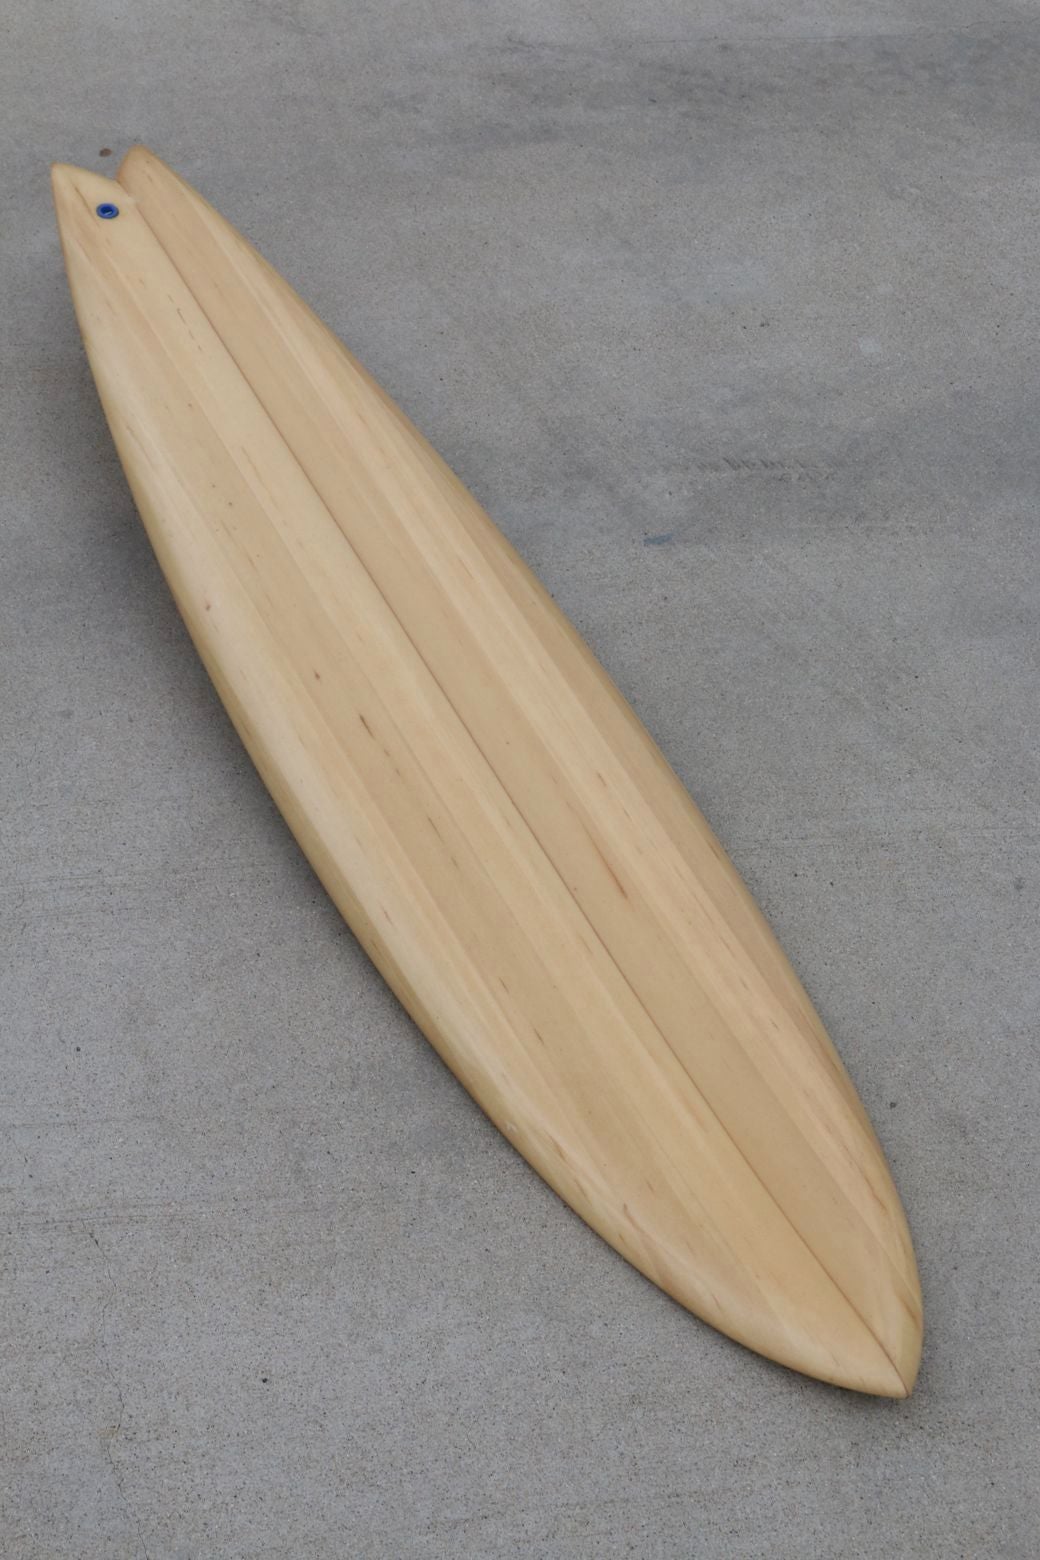 Faux Balsa Wood Surfboard, Early 1970s at 1stdibs